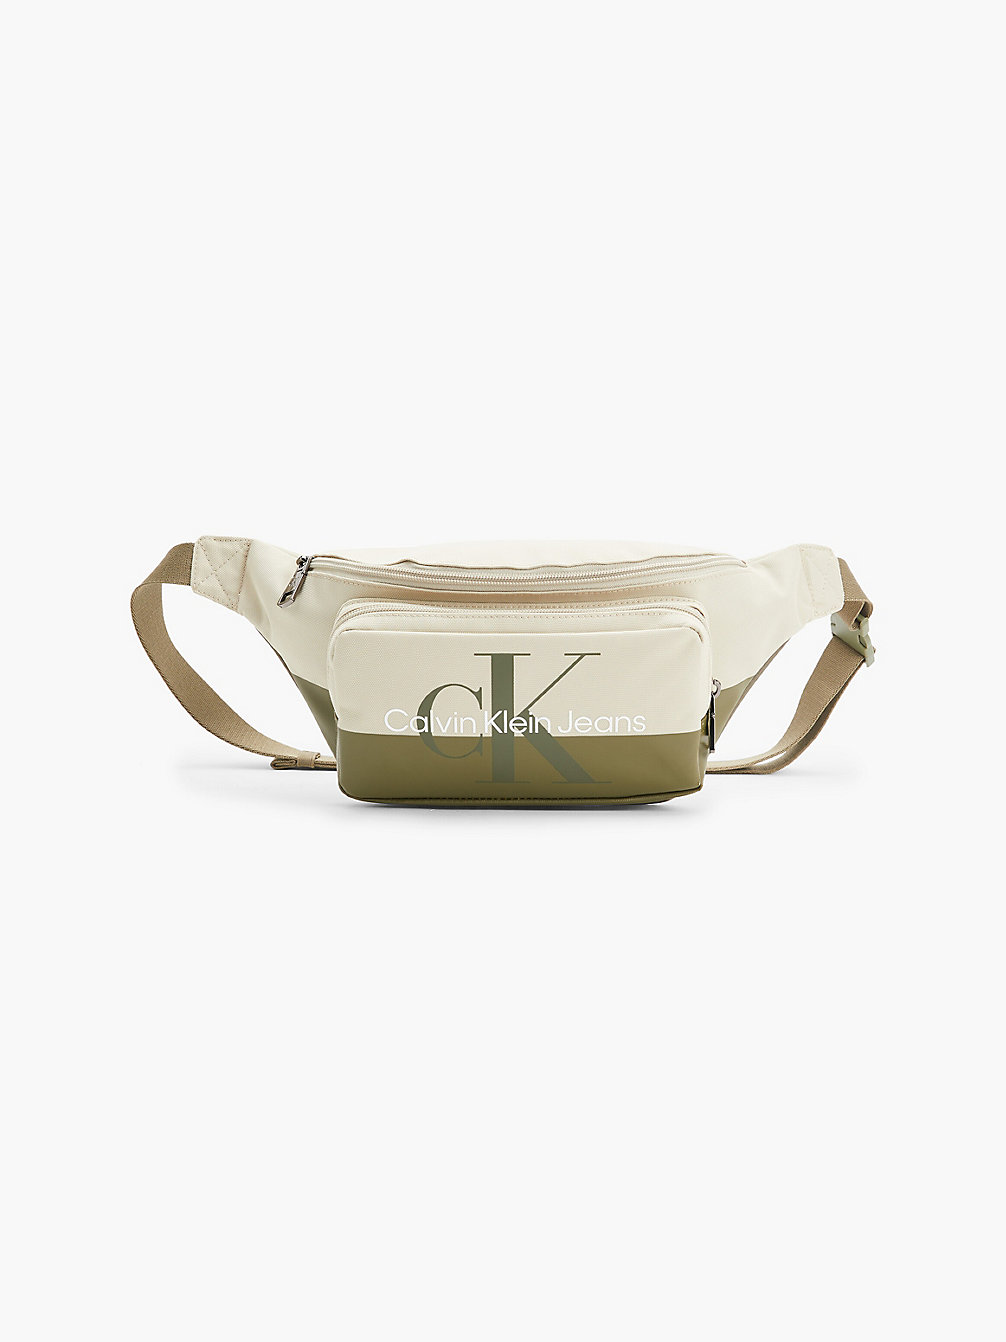 WHEAT FIELDS/BURNT OLIVE Recycled Polyester Bum Bag undefined men Calvin Klein